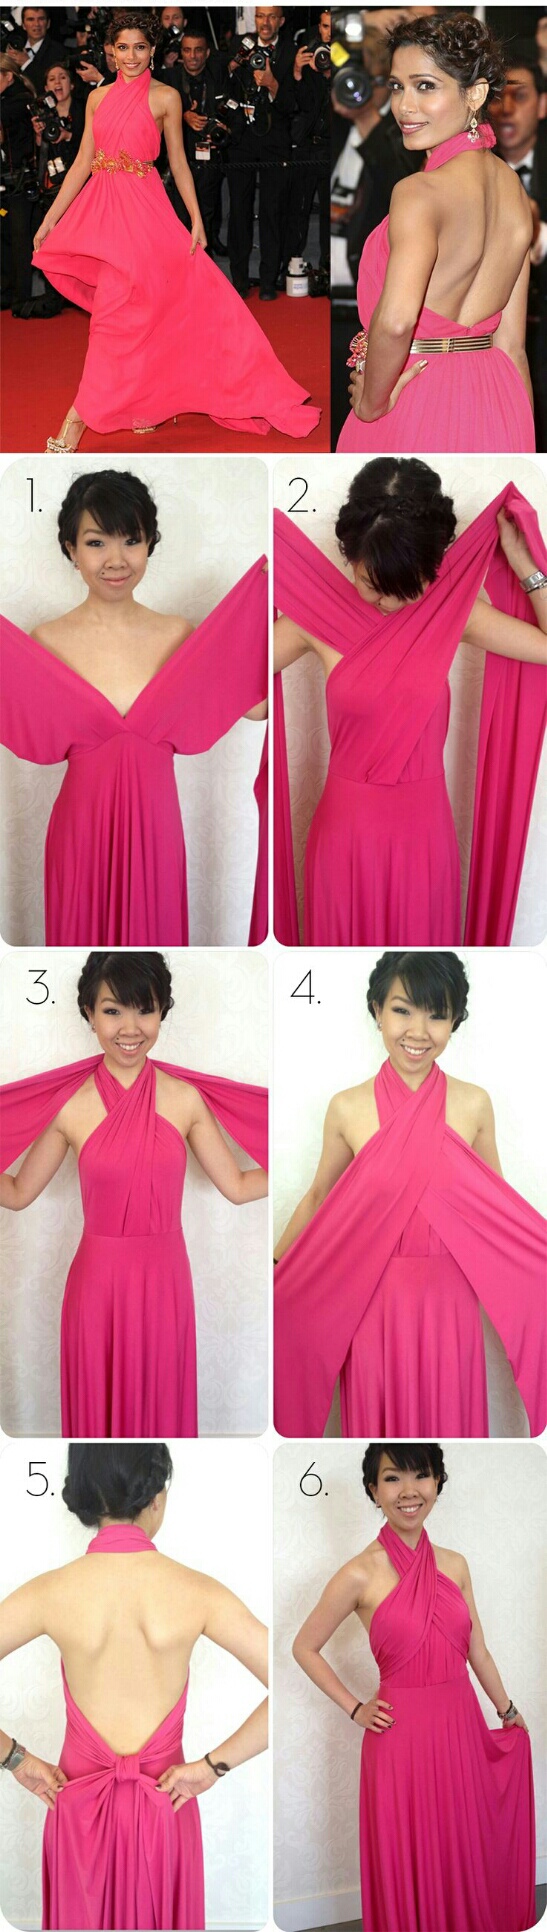 Creative Ways To Wrap and Style The Convertible Infinity Dress